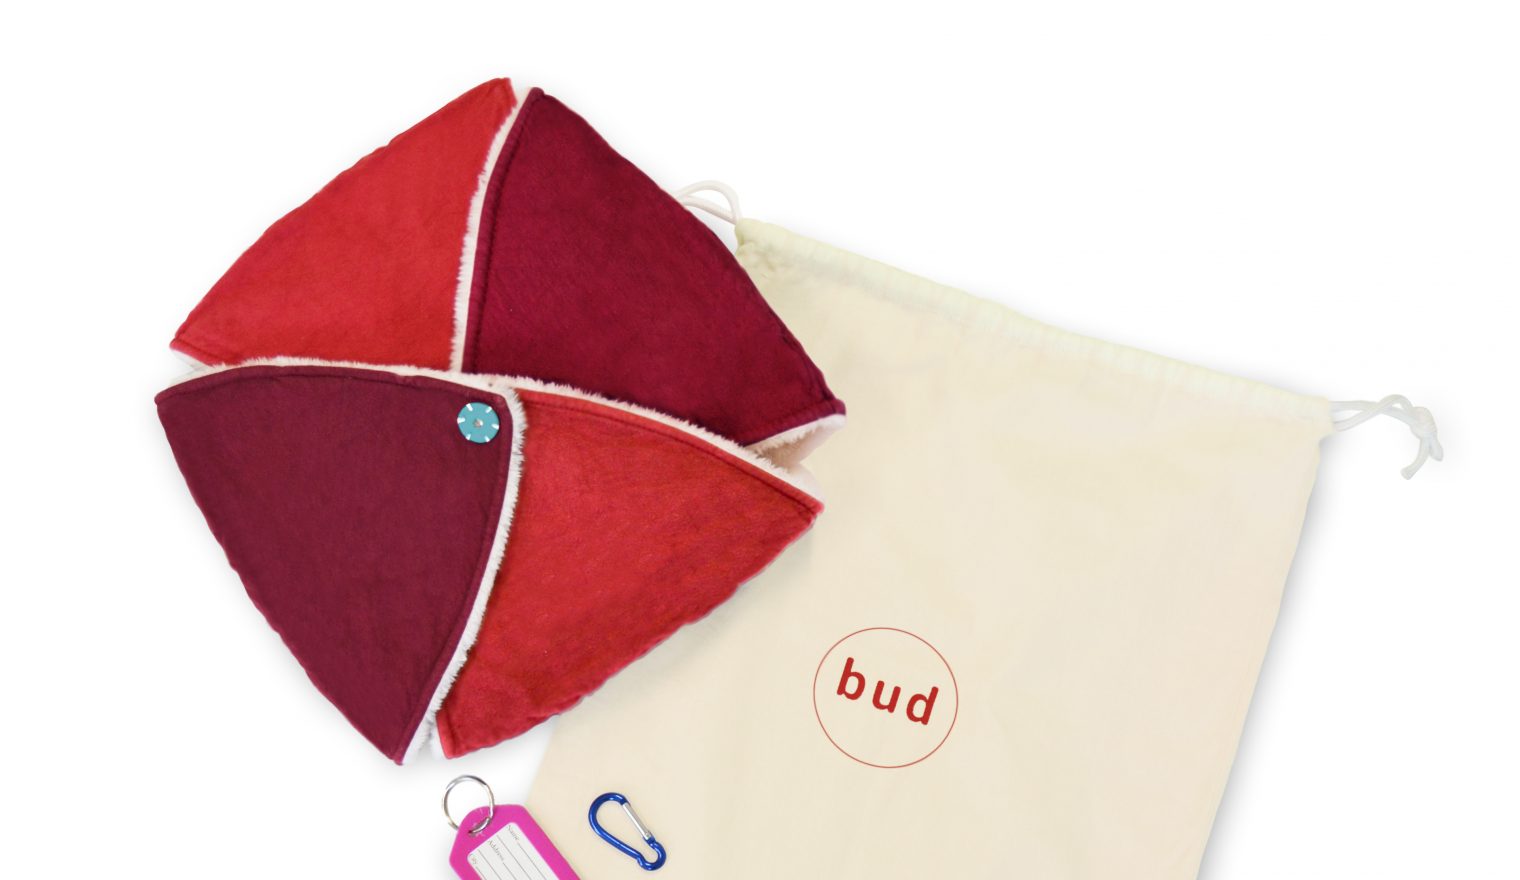 A Bud sensory cushion closed up with a carry bag and accessories